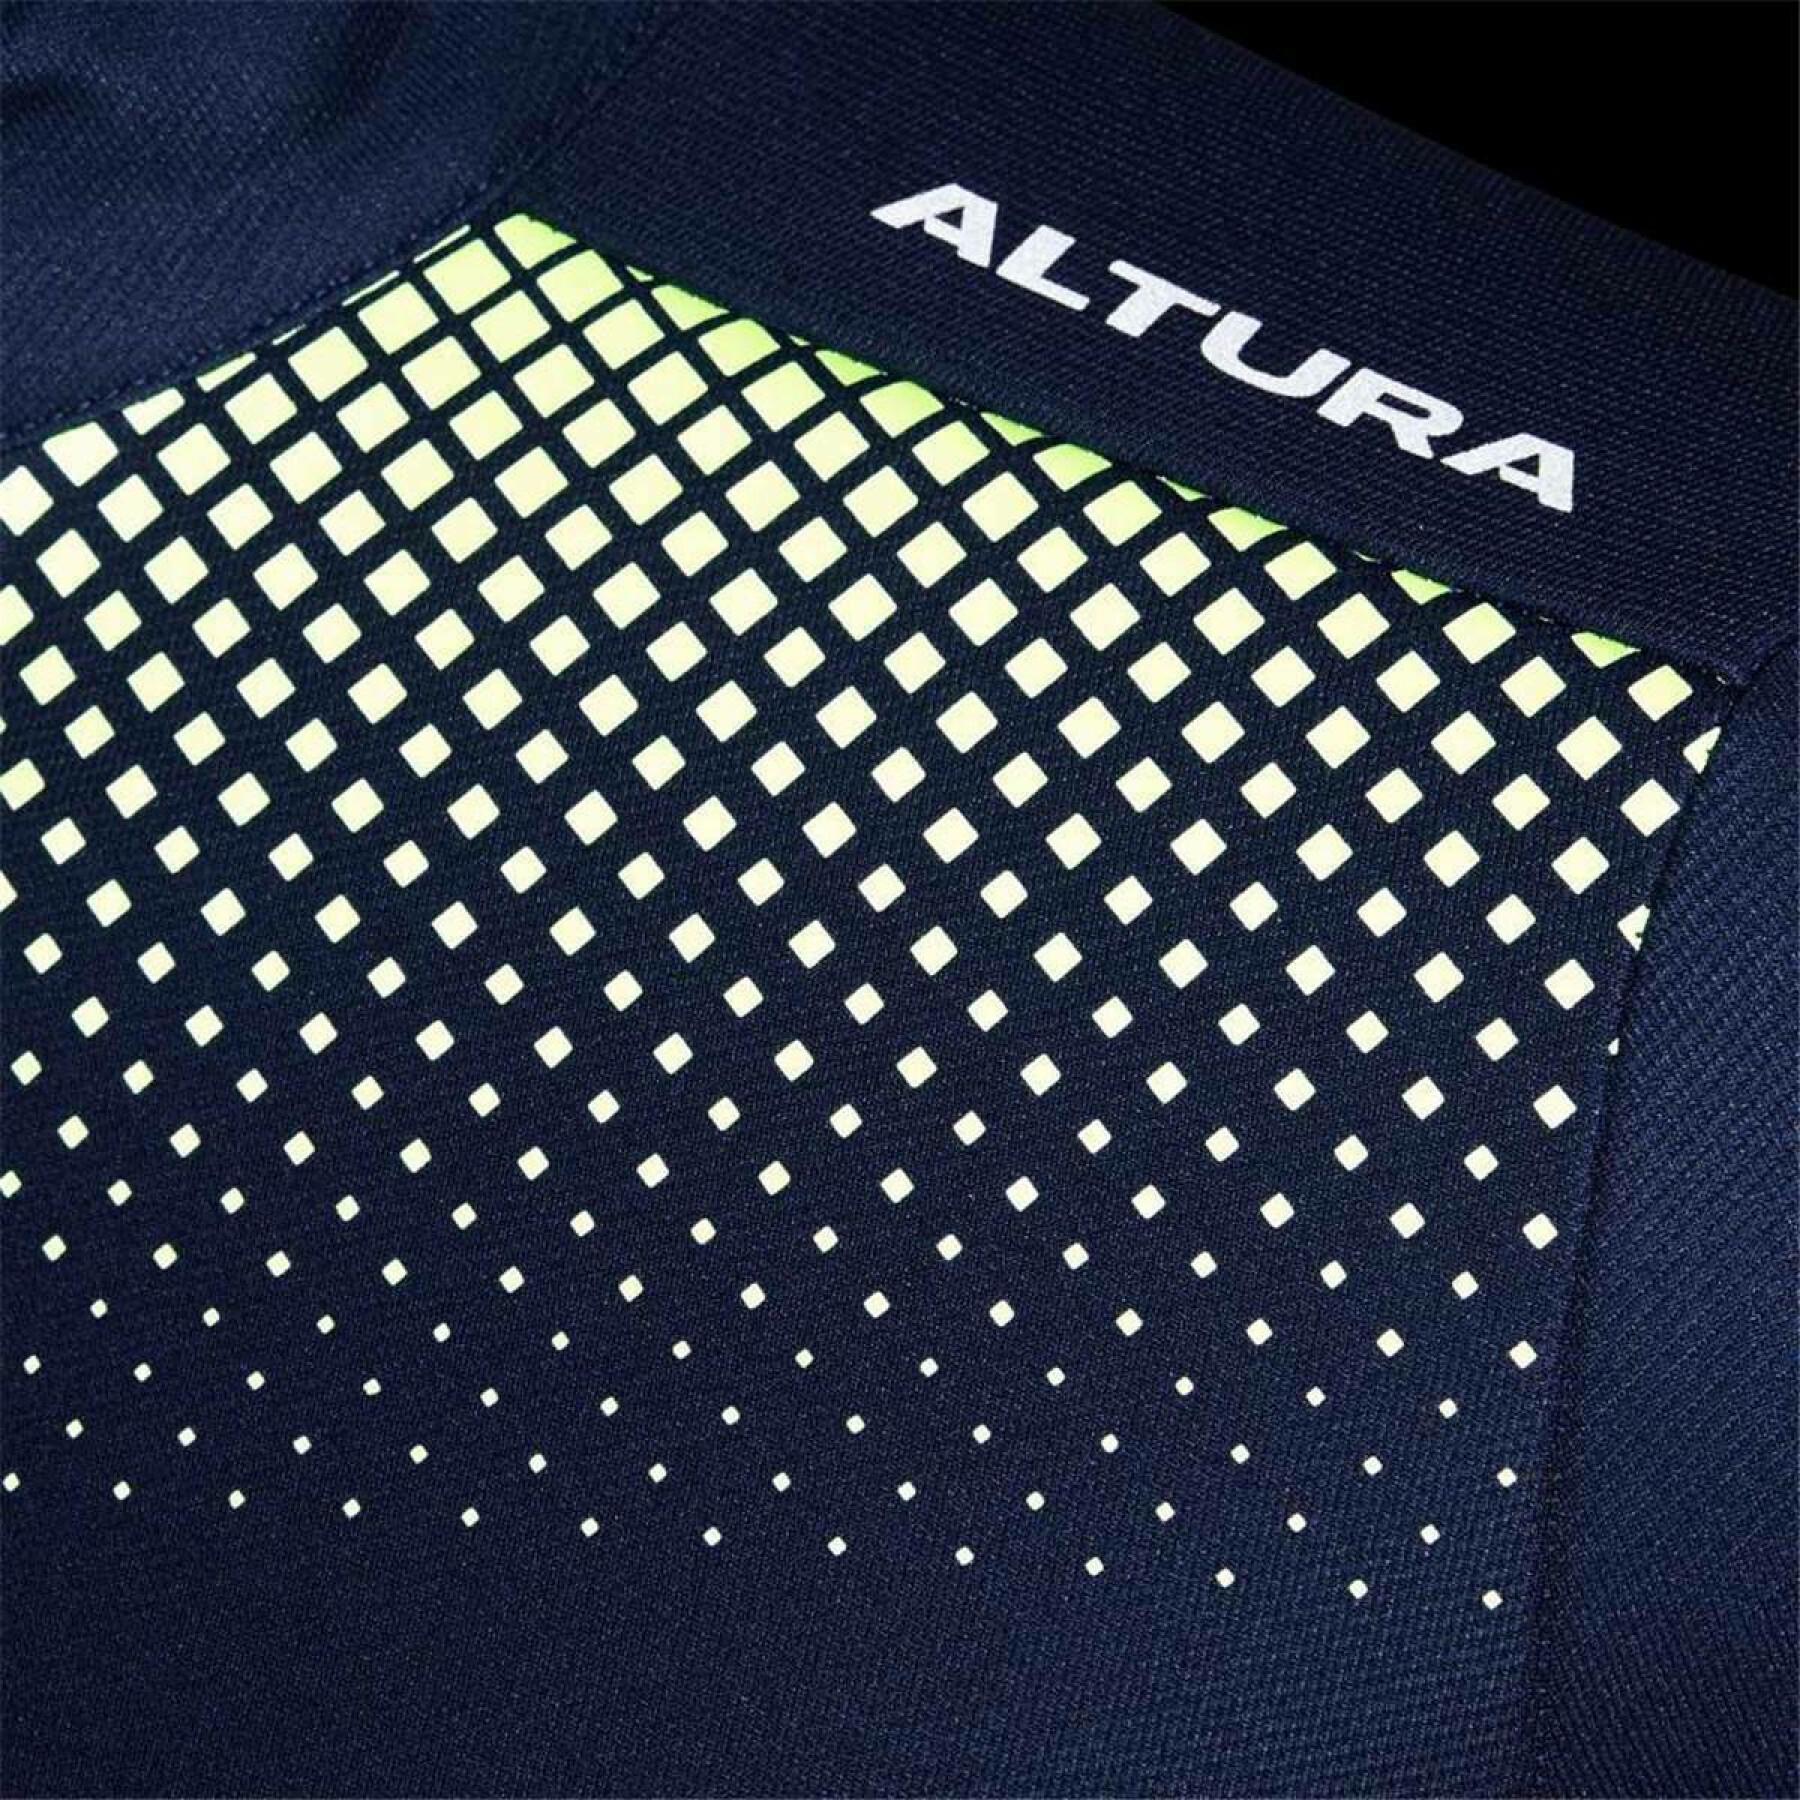 Long sleeve jersey Altura Nightvision